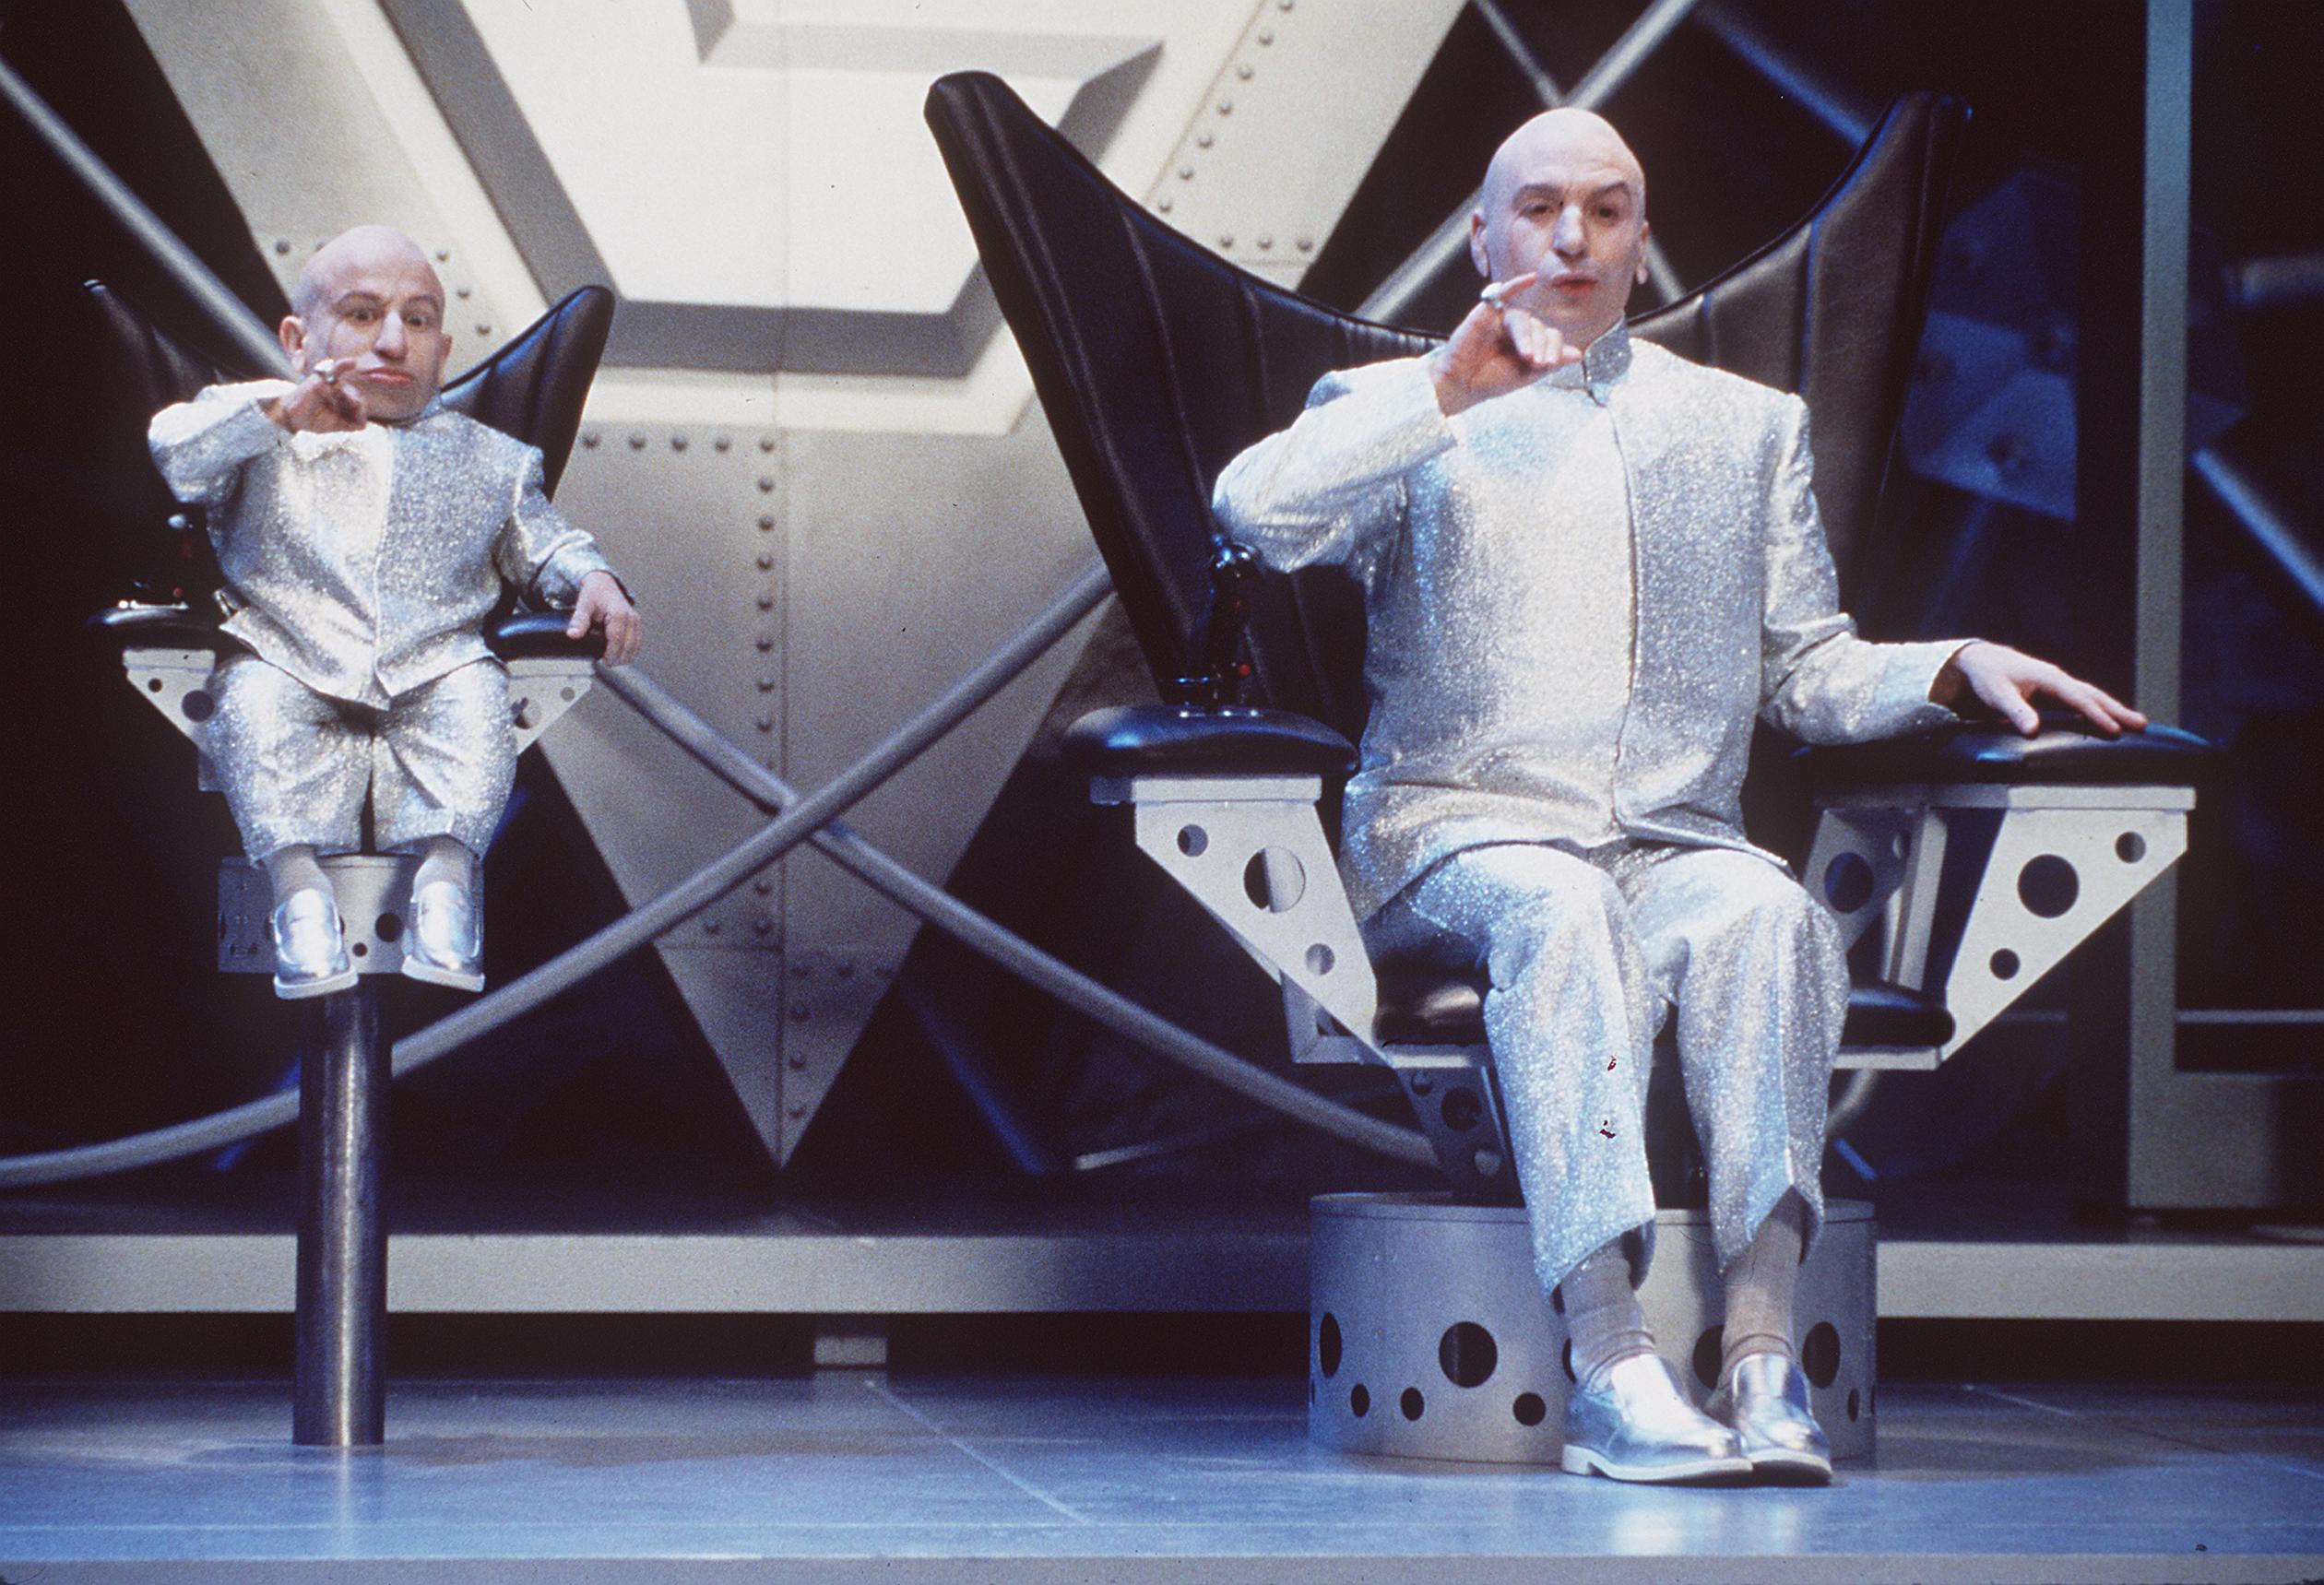 Mini-Me and Dr. Evil sitting in chairs